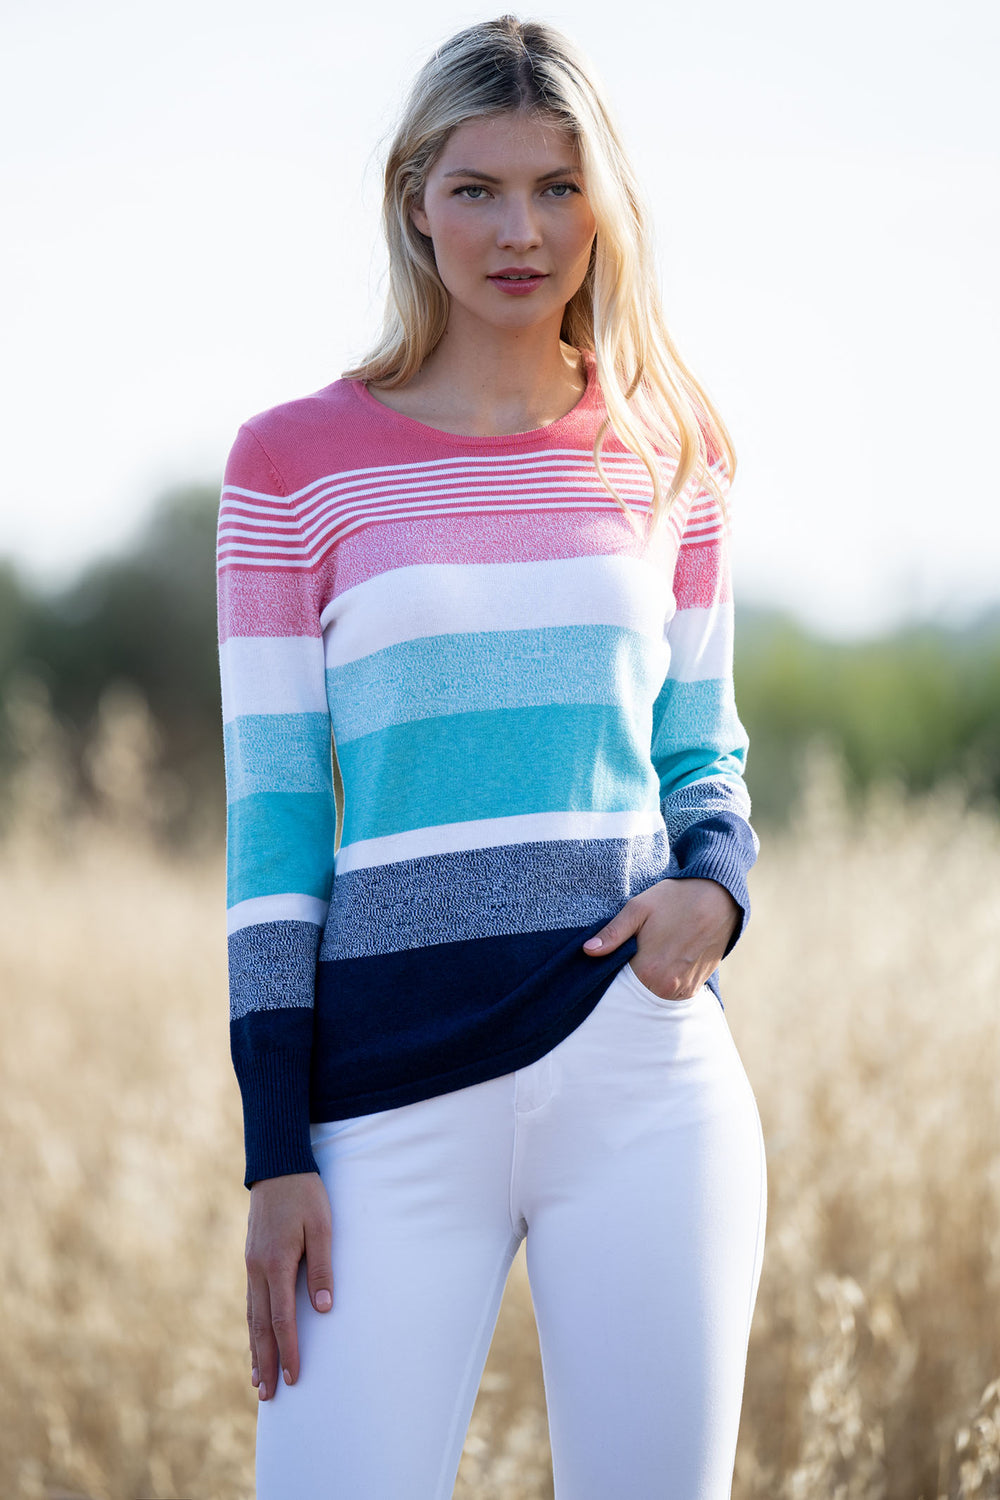 Marble Fashions 7351 135 White Ombre Stripe Jumper - Experience Boutique